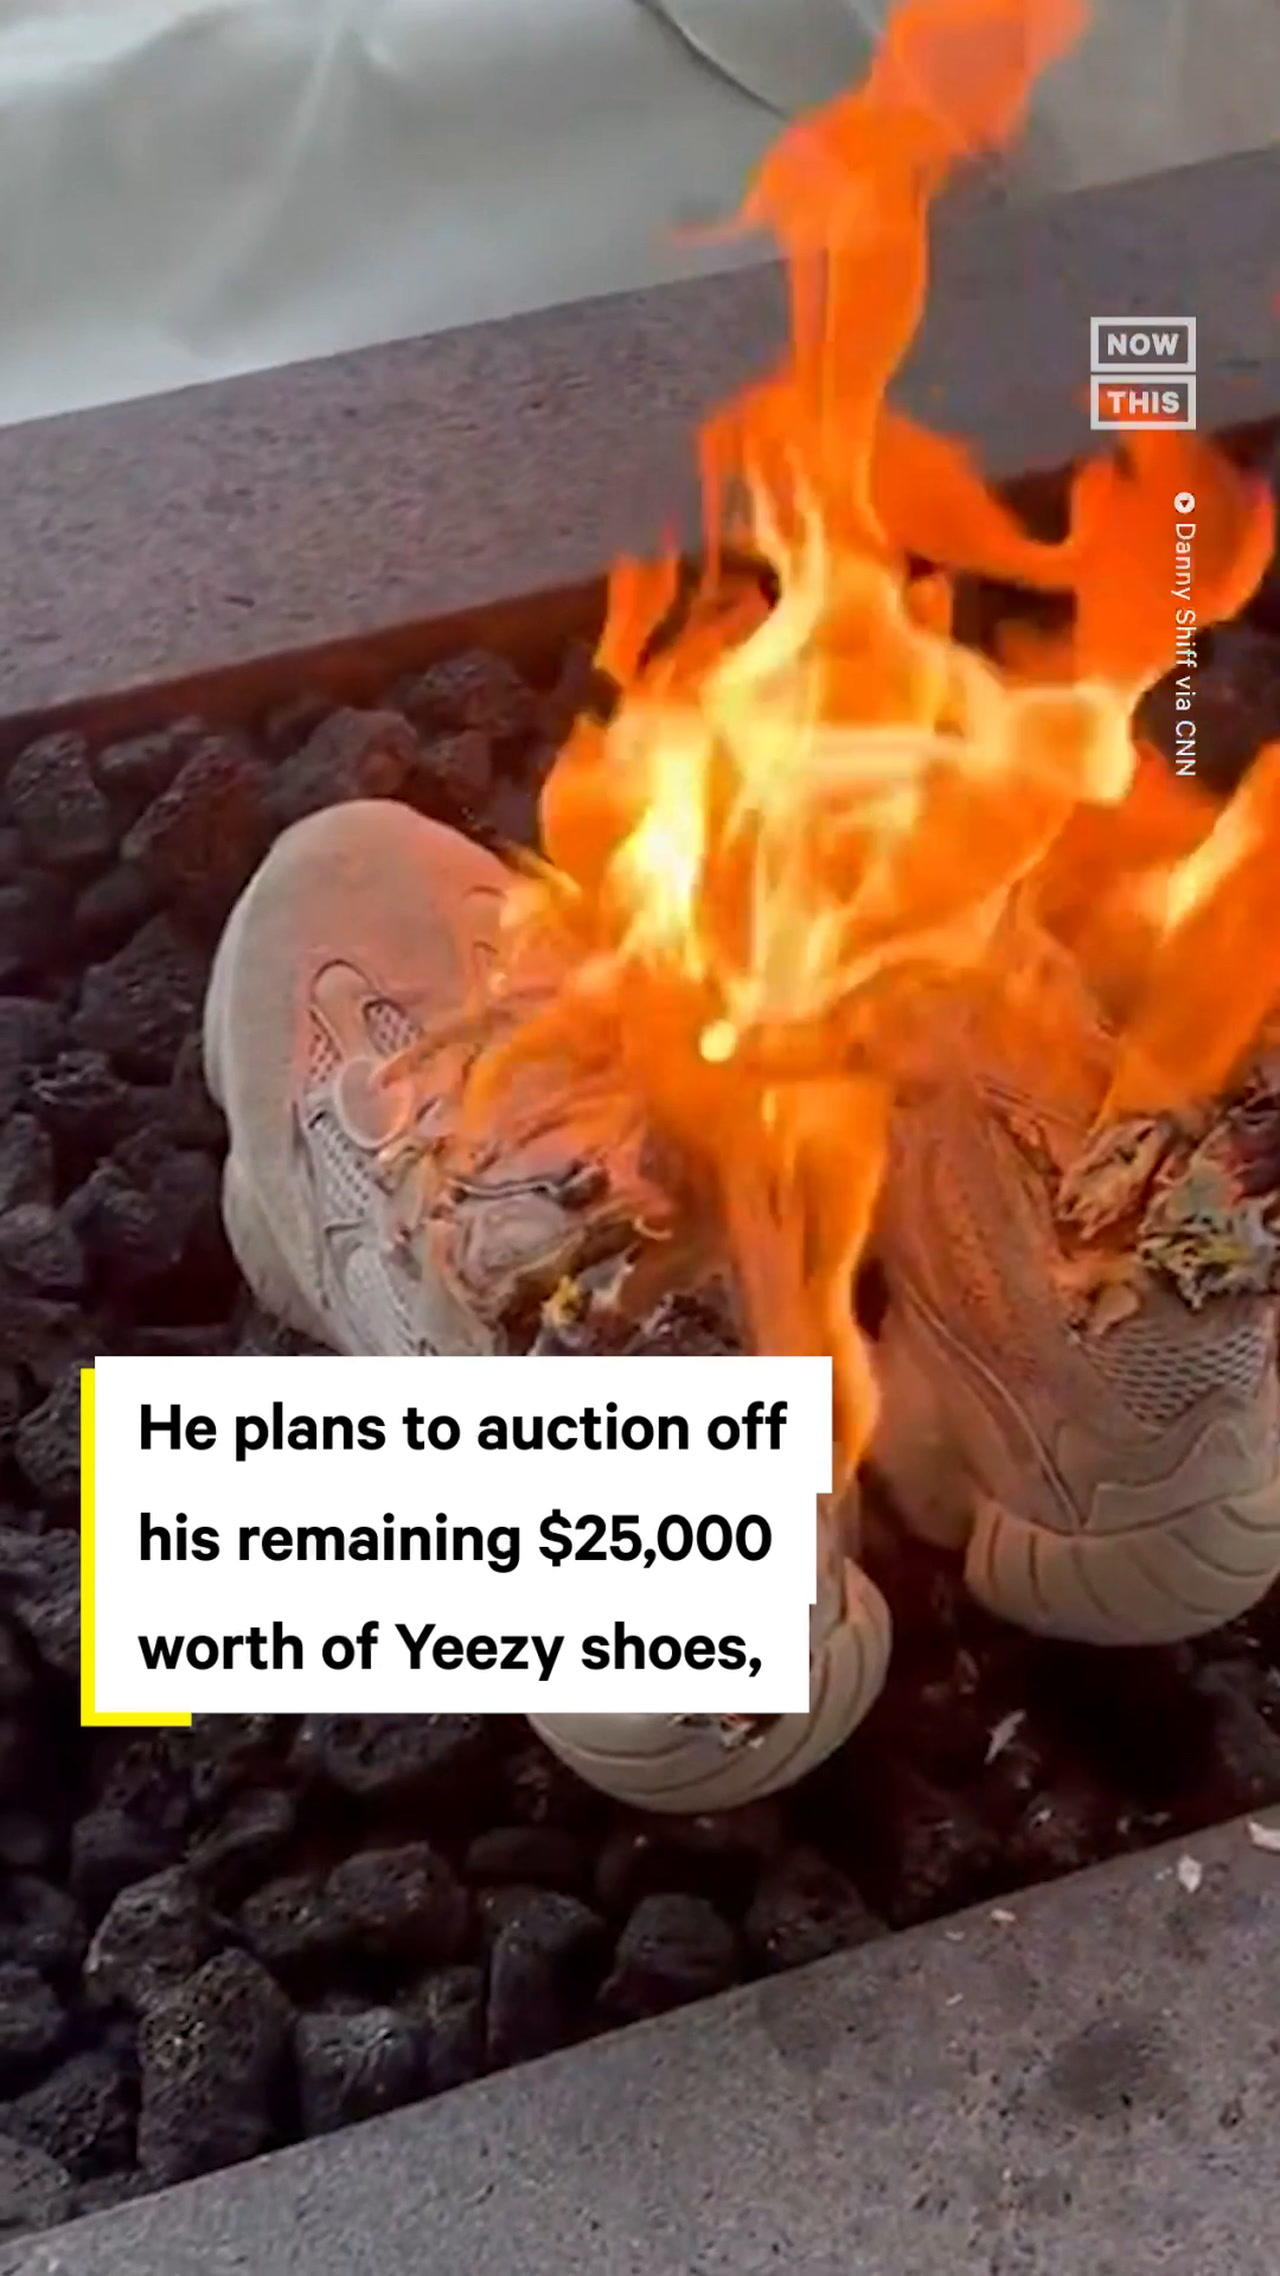 Ex-Kanye Fan Burns $15,000 Worth of Yeezys After Rapper's Antisemitic Remarks